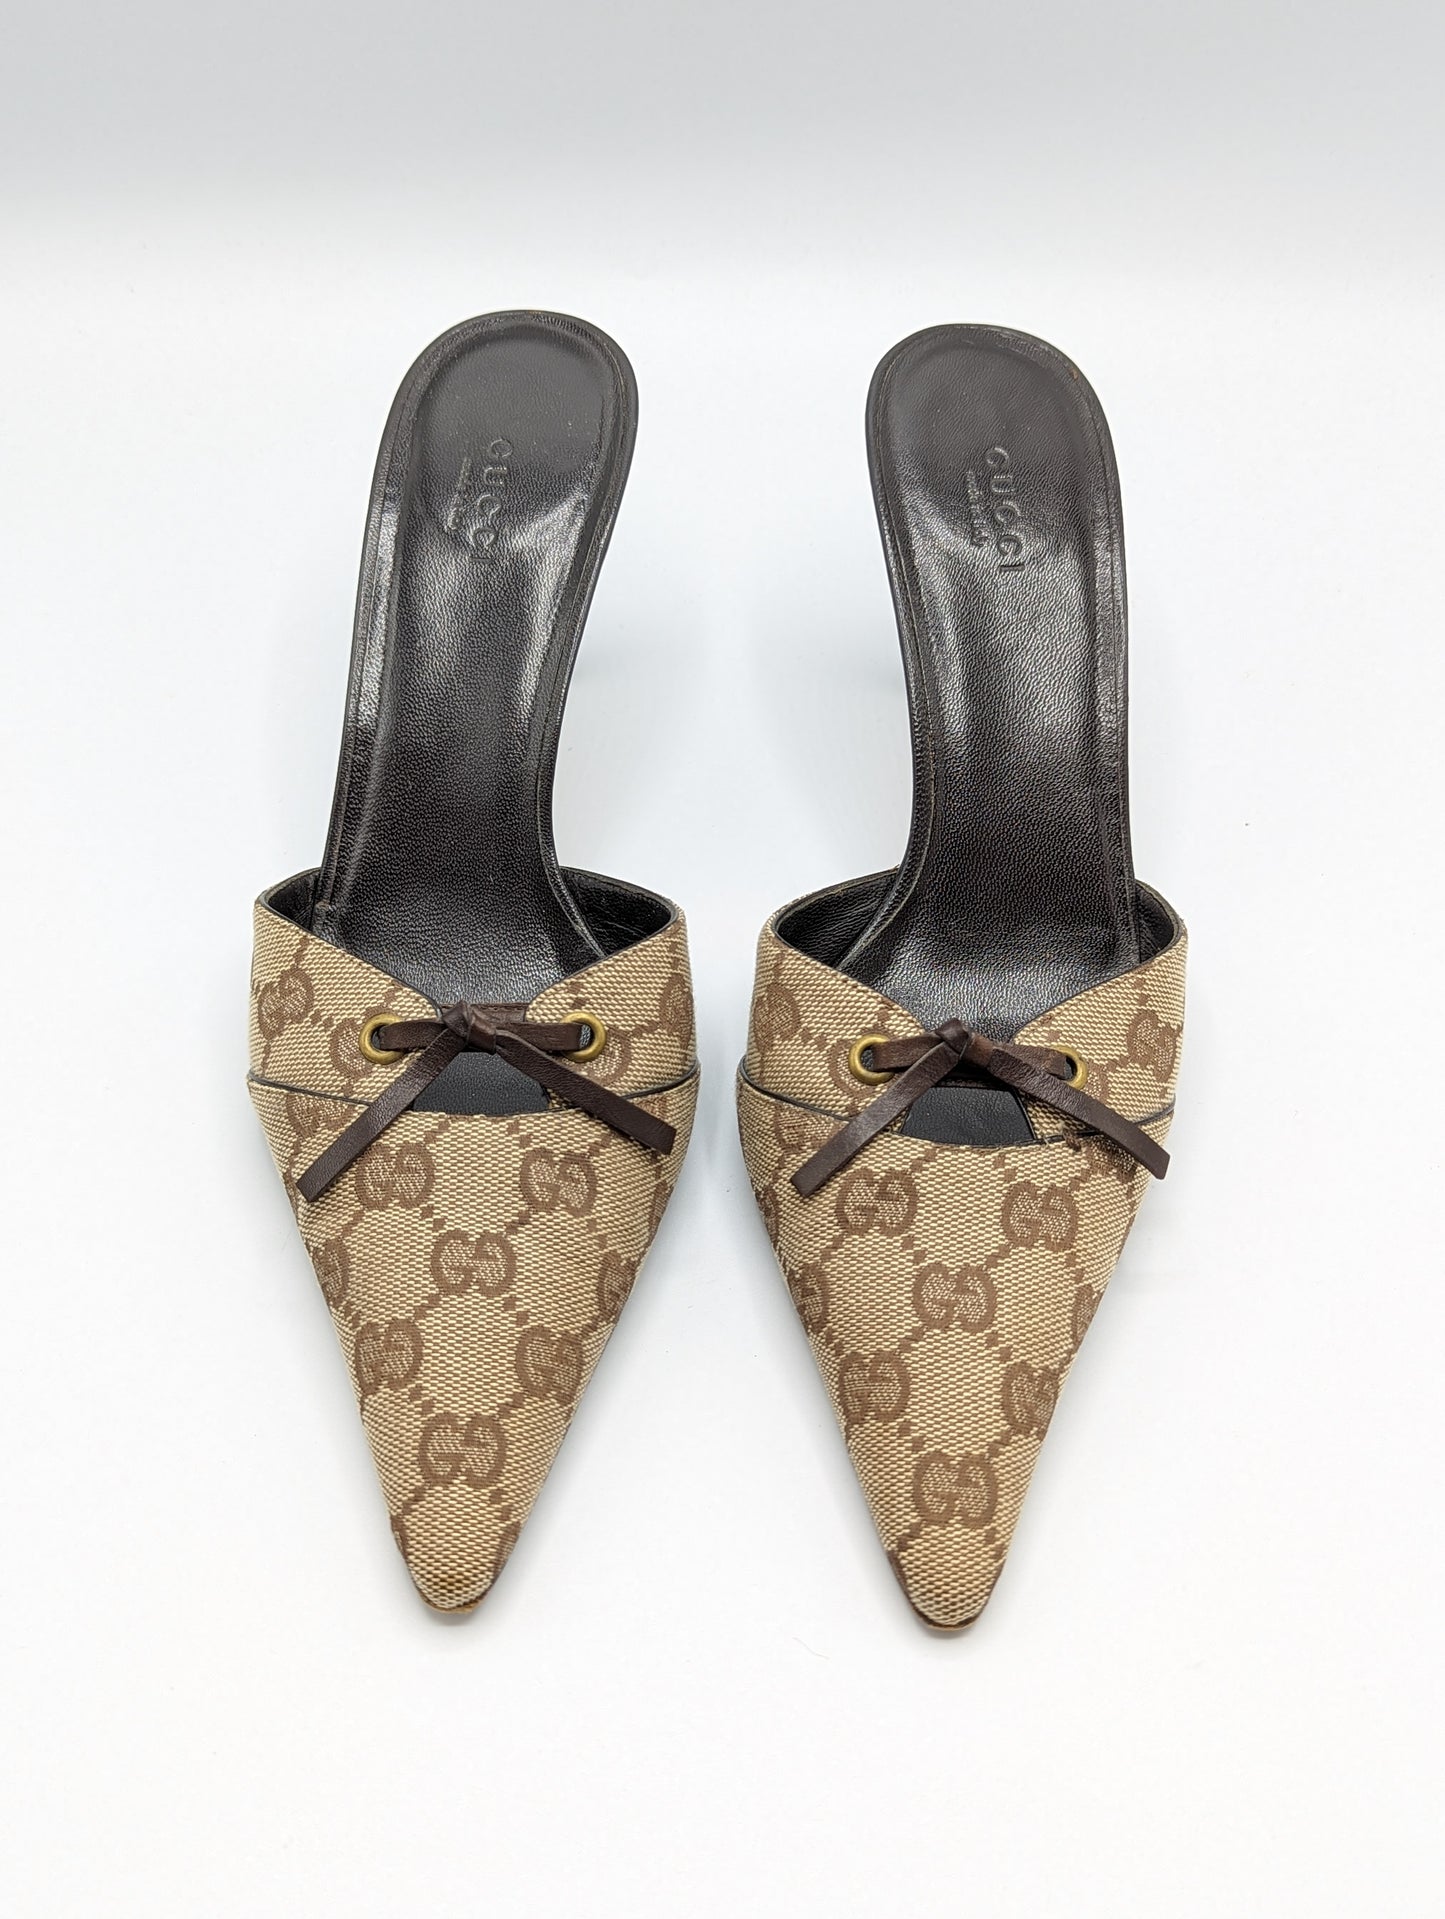 Gucci Monogram Pointed Mules Size 9